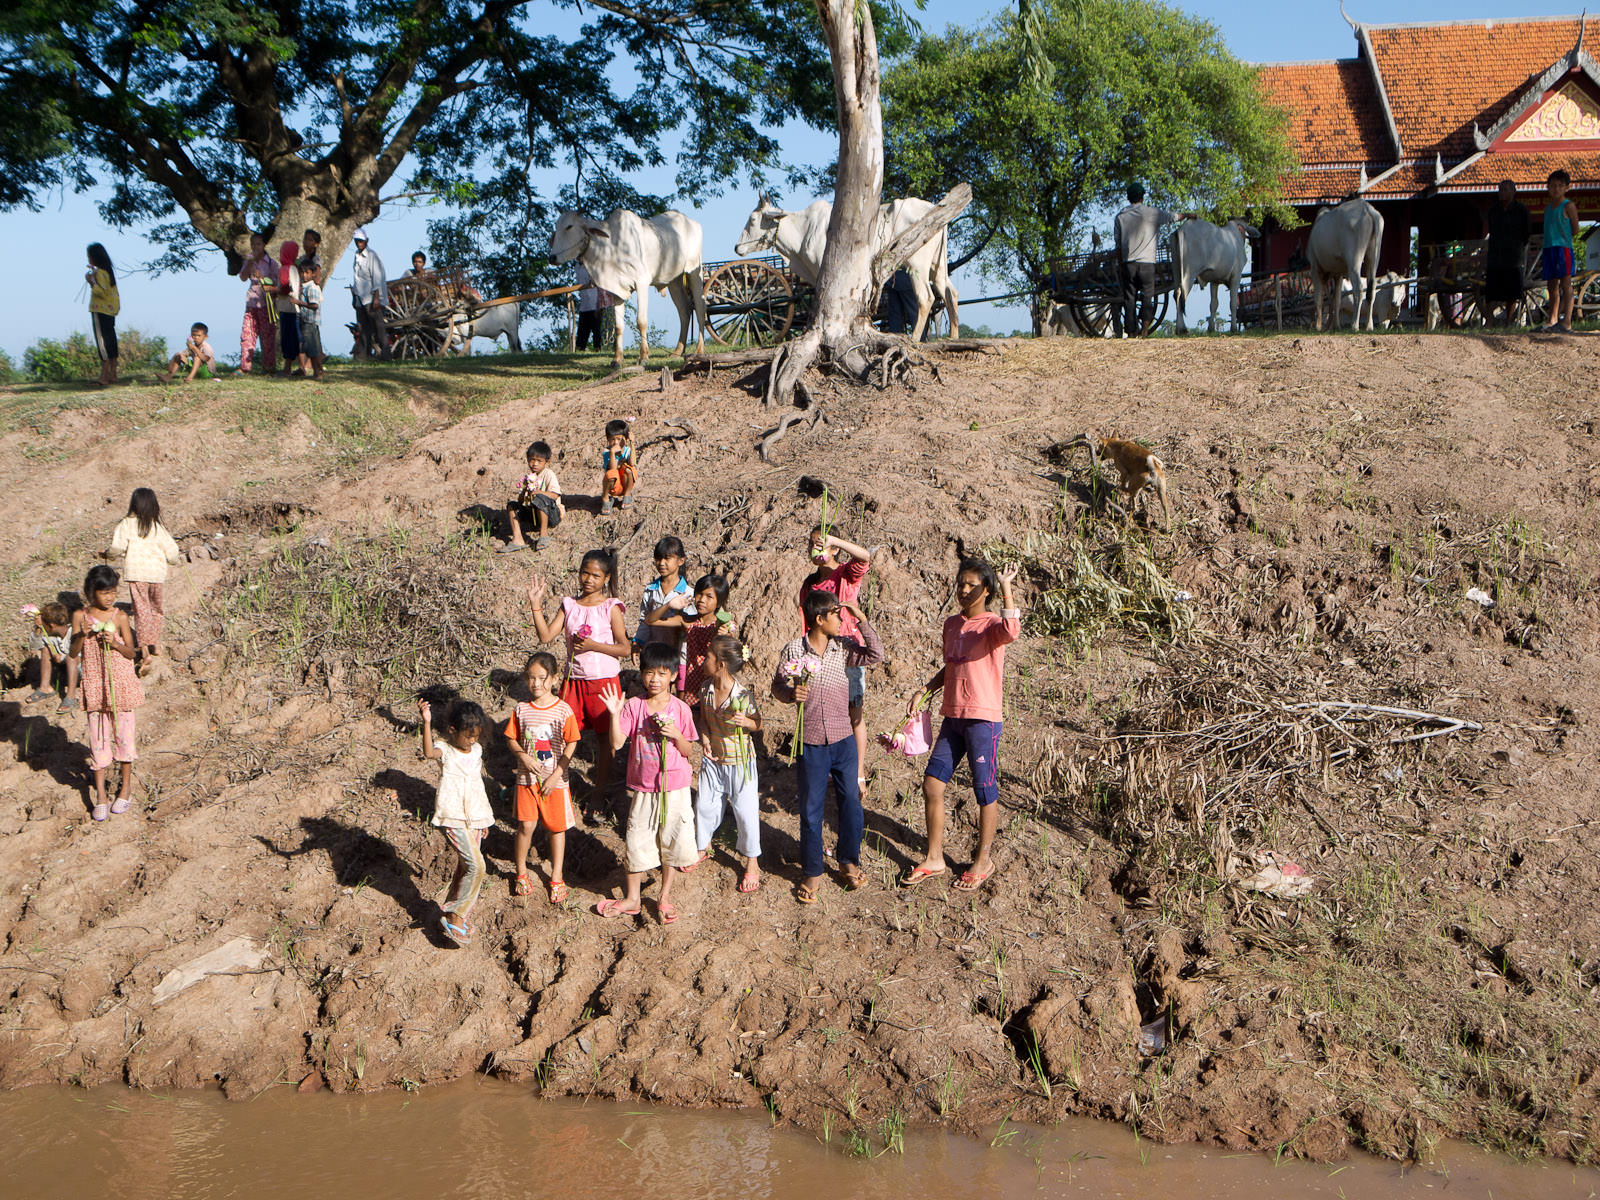 Village children waiting for us on the river bank